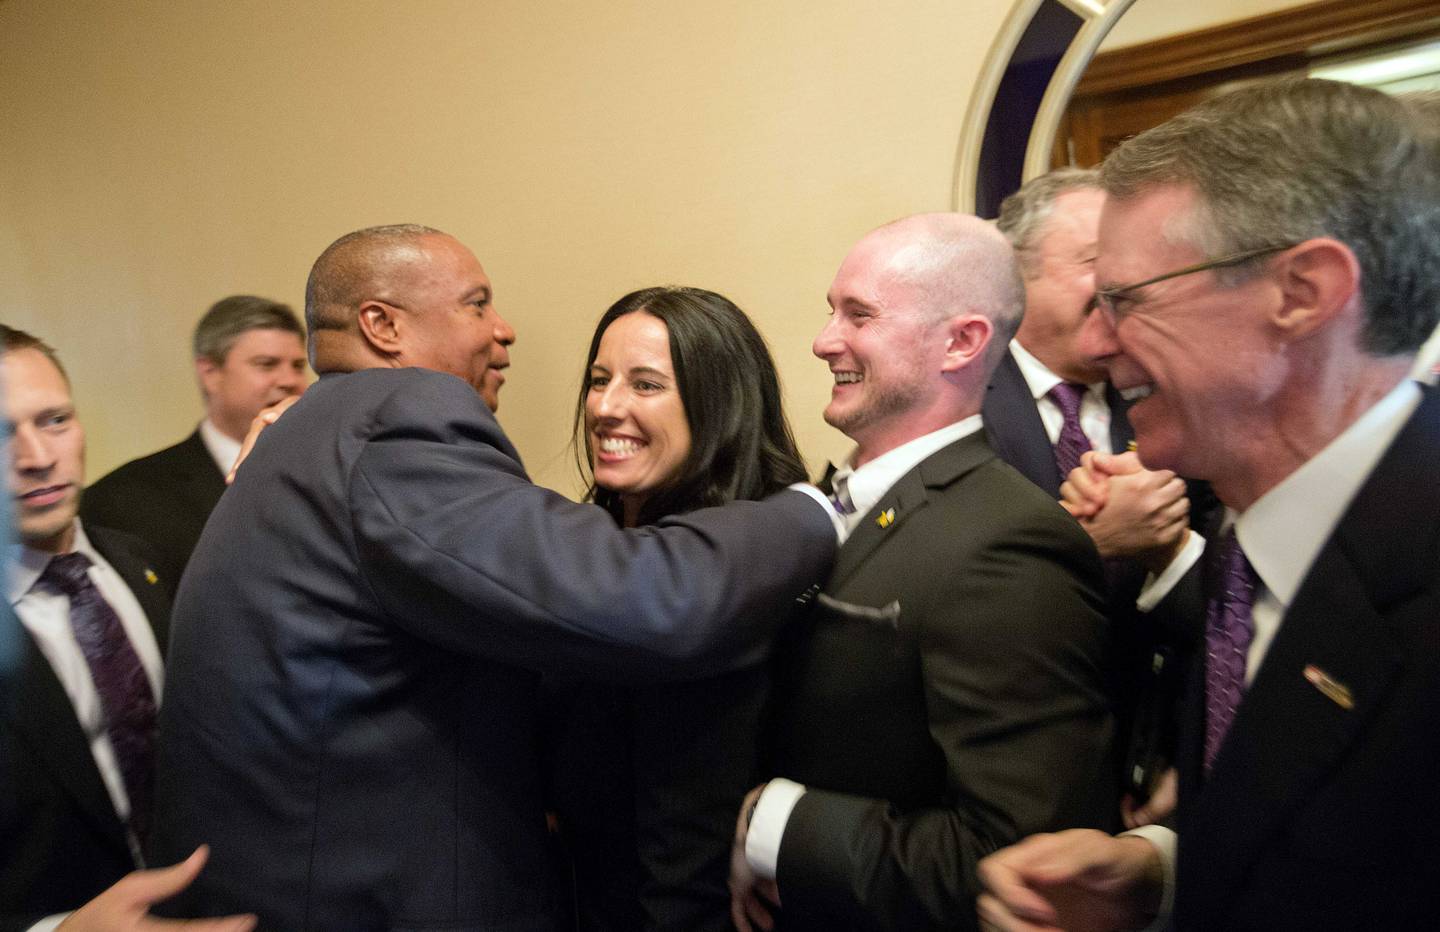 Members of the Minnesota Vikings front office, Kevin Warren, center left, Tanya Dreesen, center, and Matt Muenier, center right, celebrate with Richard Davis, right, CEO of U.S. Bank and the  Minneapolis bid committee co-chair, after Minneapolis was selected as the host for 2018 Super Bowl at the NFL's spring meetings, Tuesday, May 20, 2014, in Atlanta.